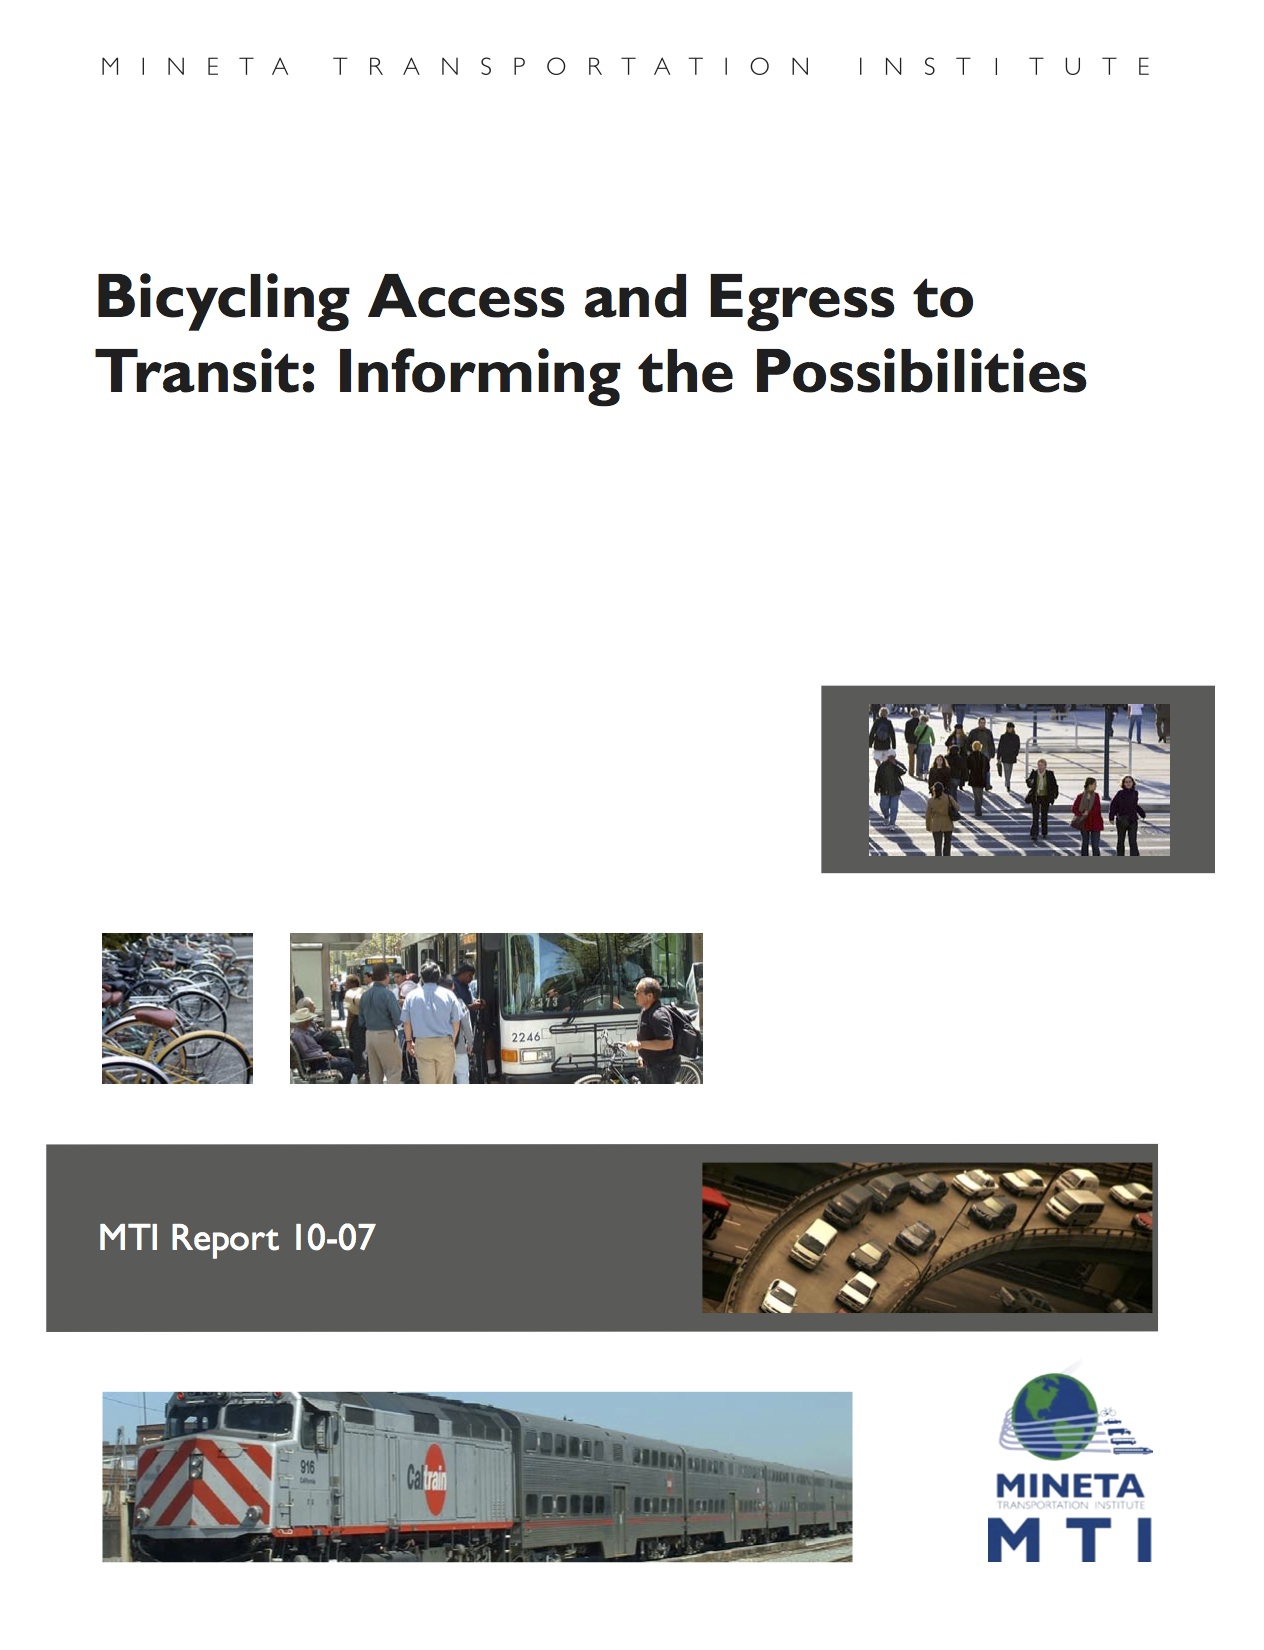 Bicycling Access and Egress to Transit: Informing the Possibilities